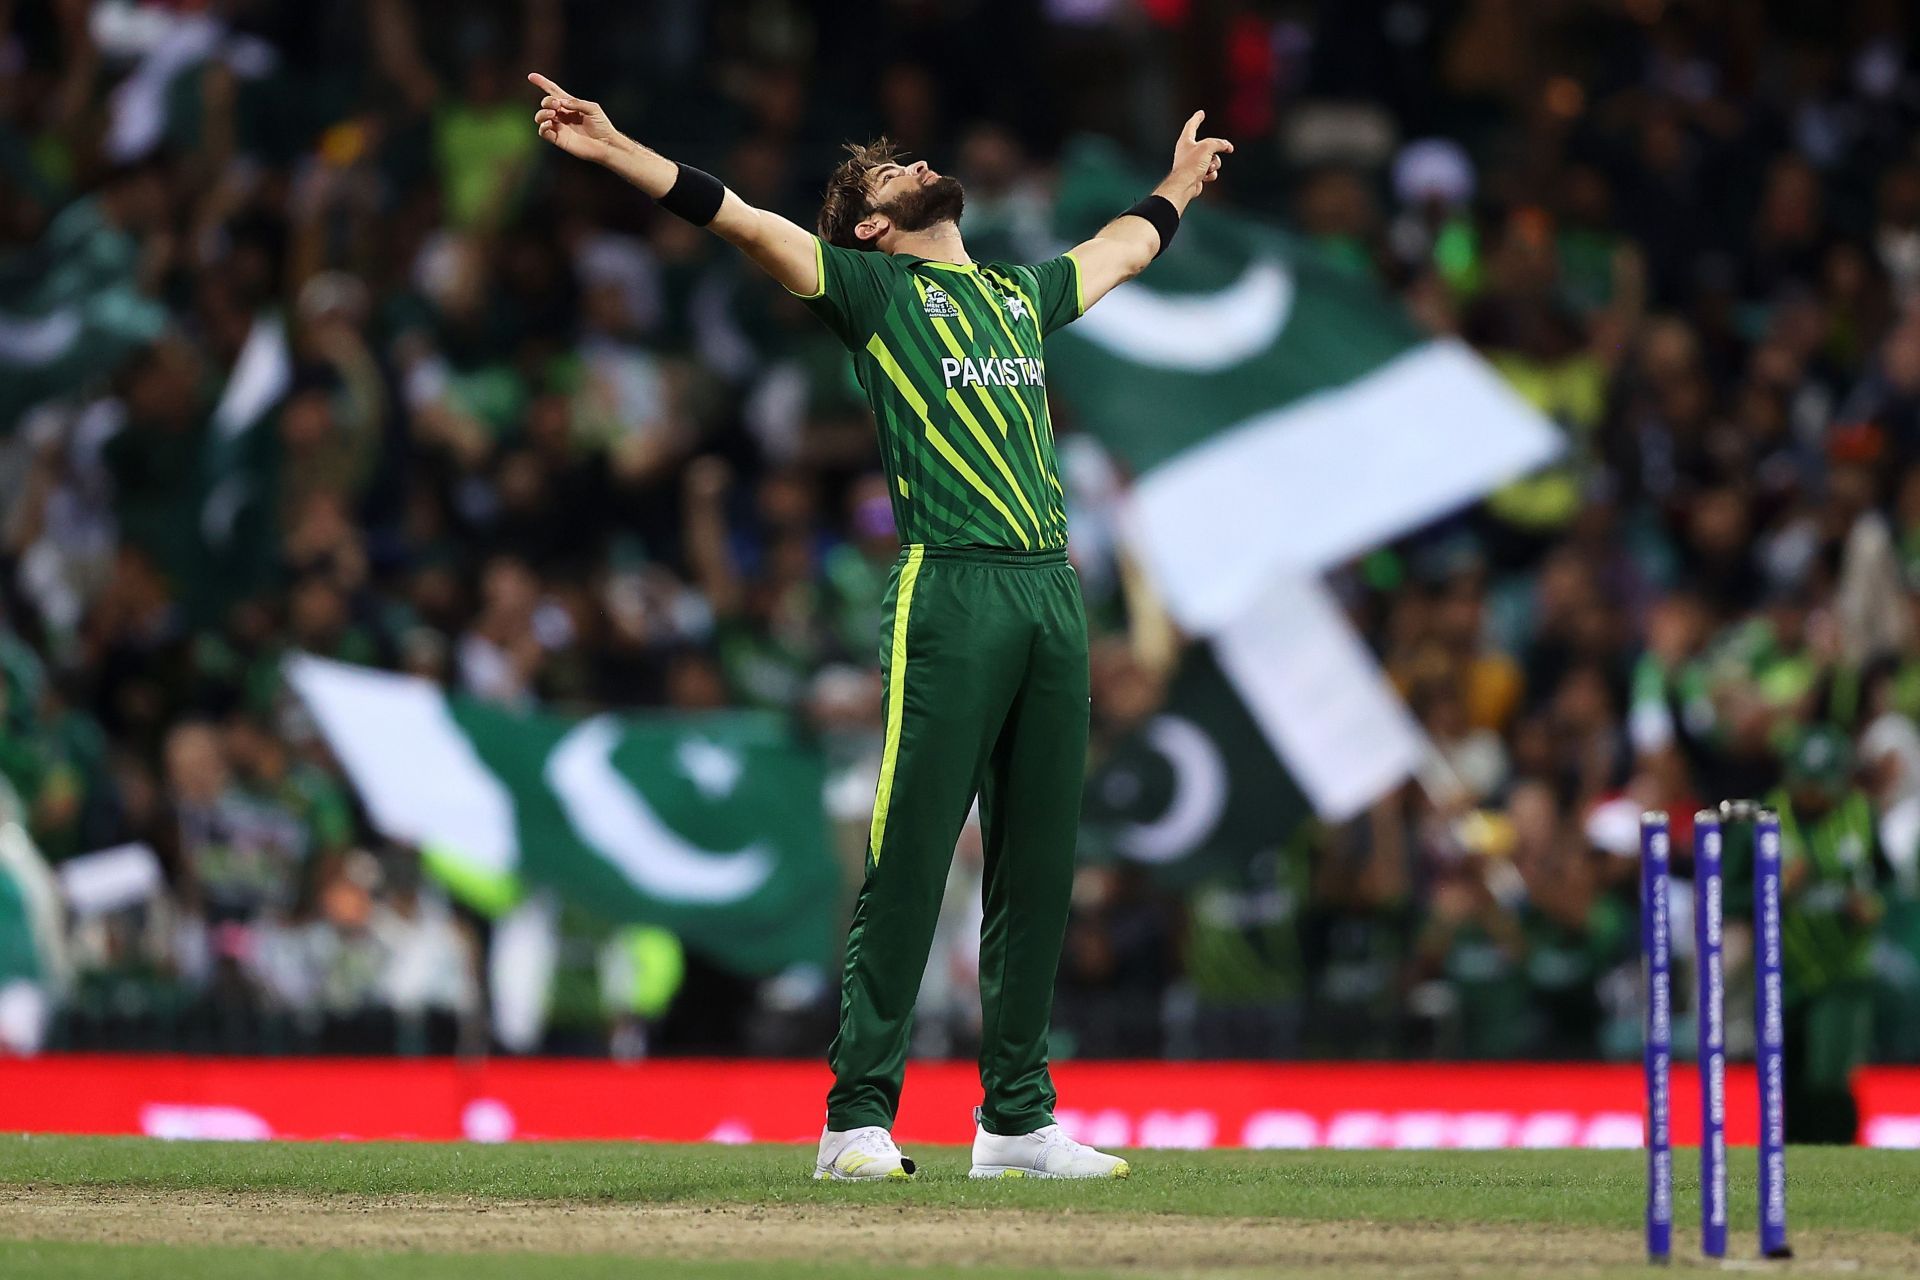 Shaheen Afridi celebrates after taking the wicket of Kane Williamson in the first semi-final. Pic: Getty Images